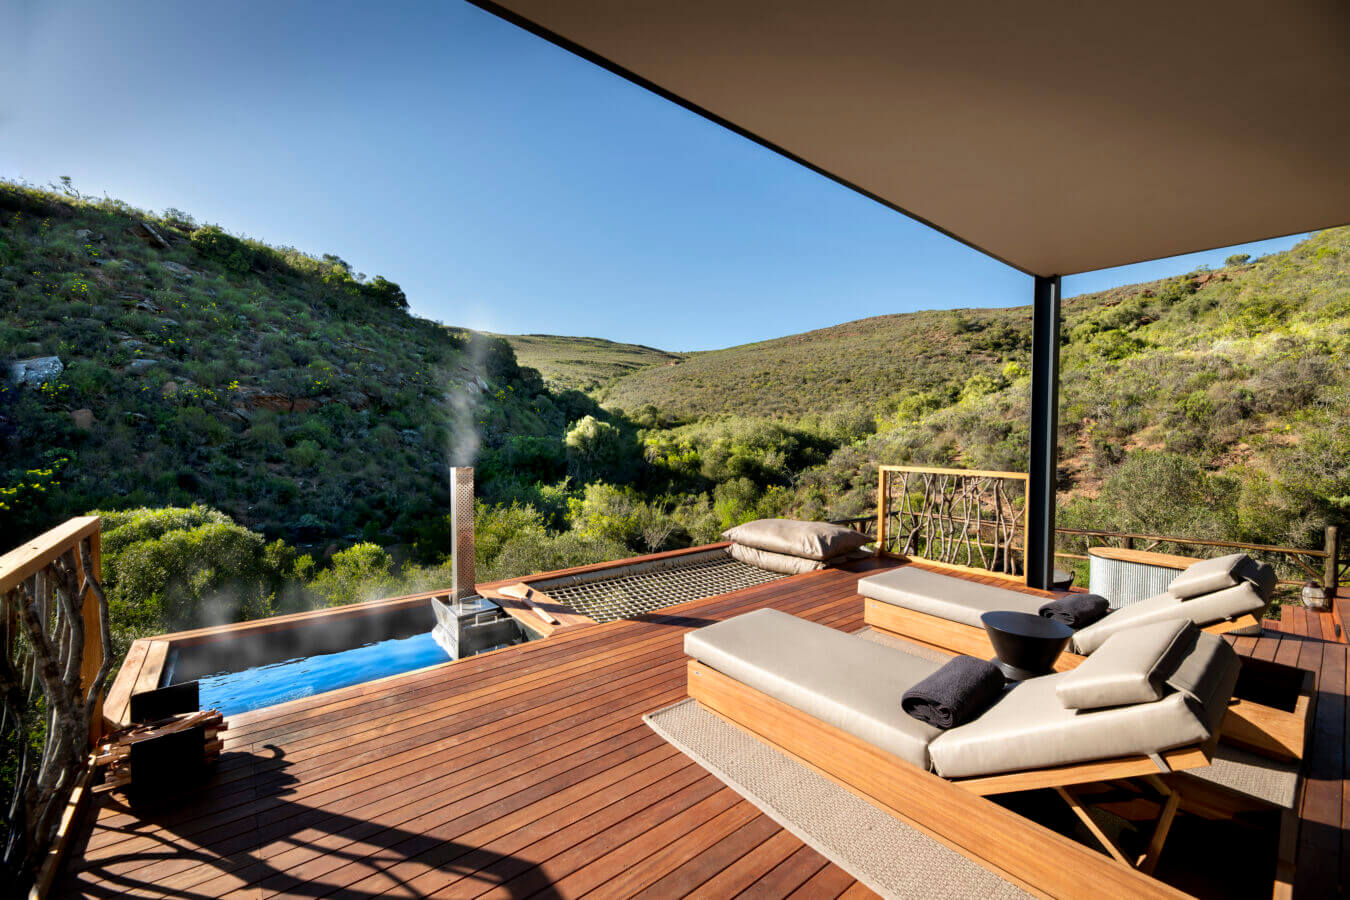 A wooden deck with lounge chairs, a small pool emitting steam, and a hammock, overlooks a green hilly landscape under a clear blue sky at Melozhori Private Game Reserve in south africa